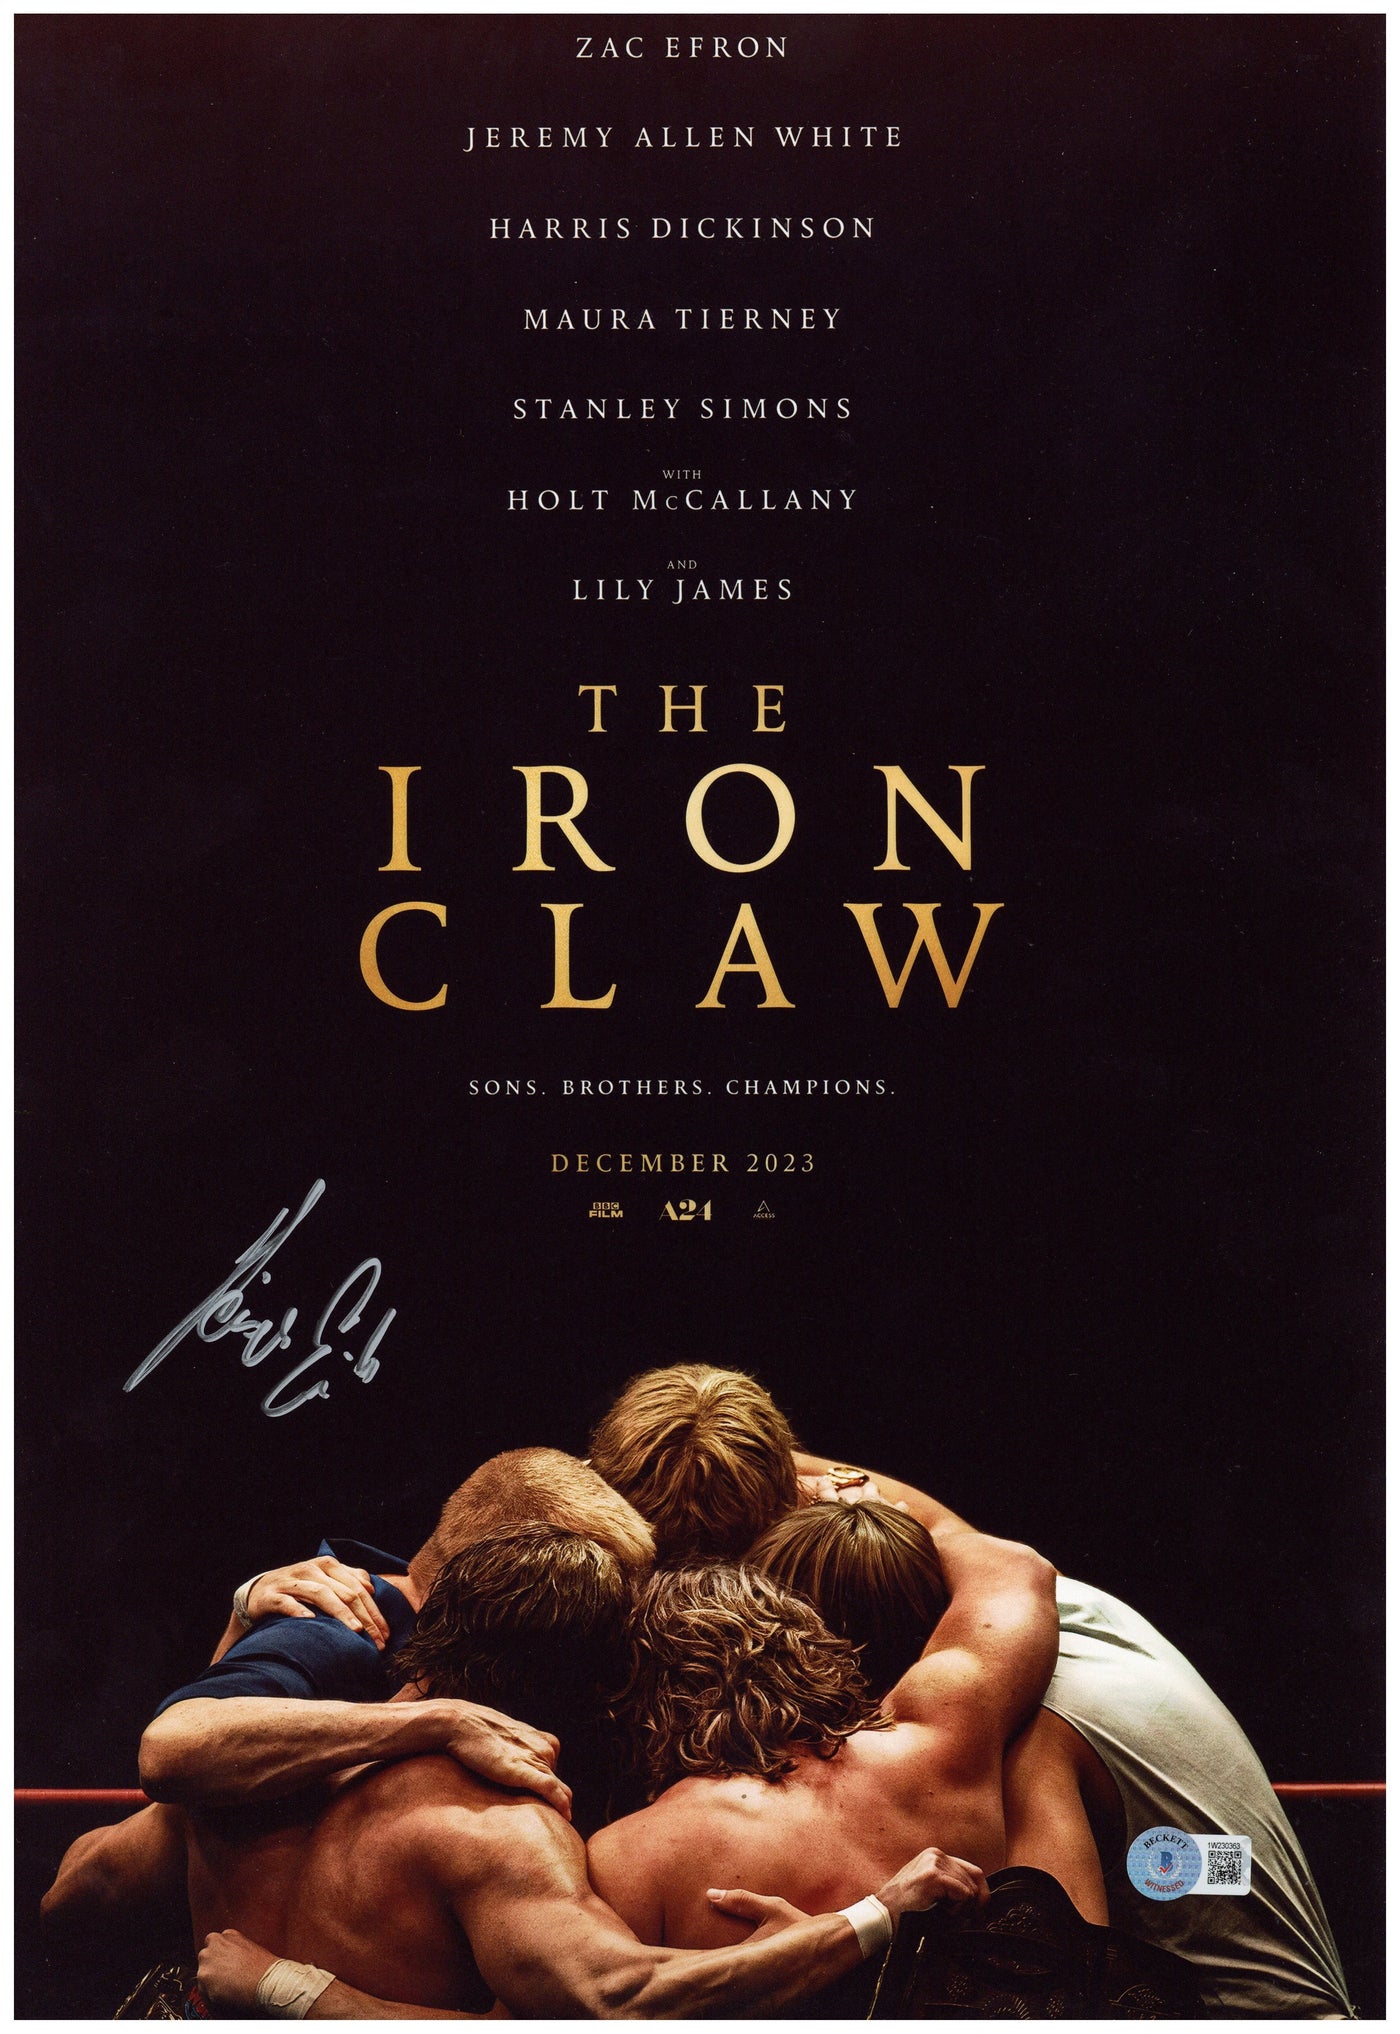 SPECIAL Kevin Von Erich Signed 12x18 Photo Iron Claw Autographed BAS COA